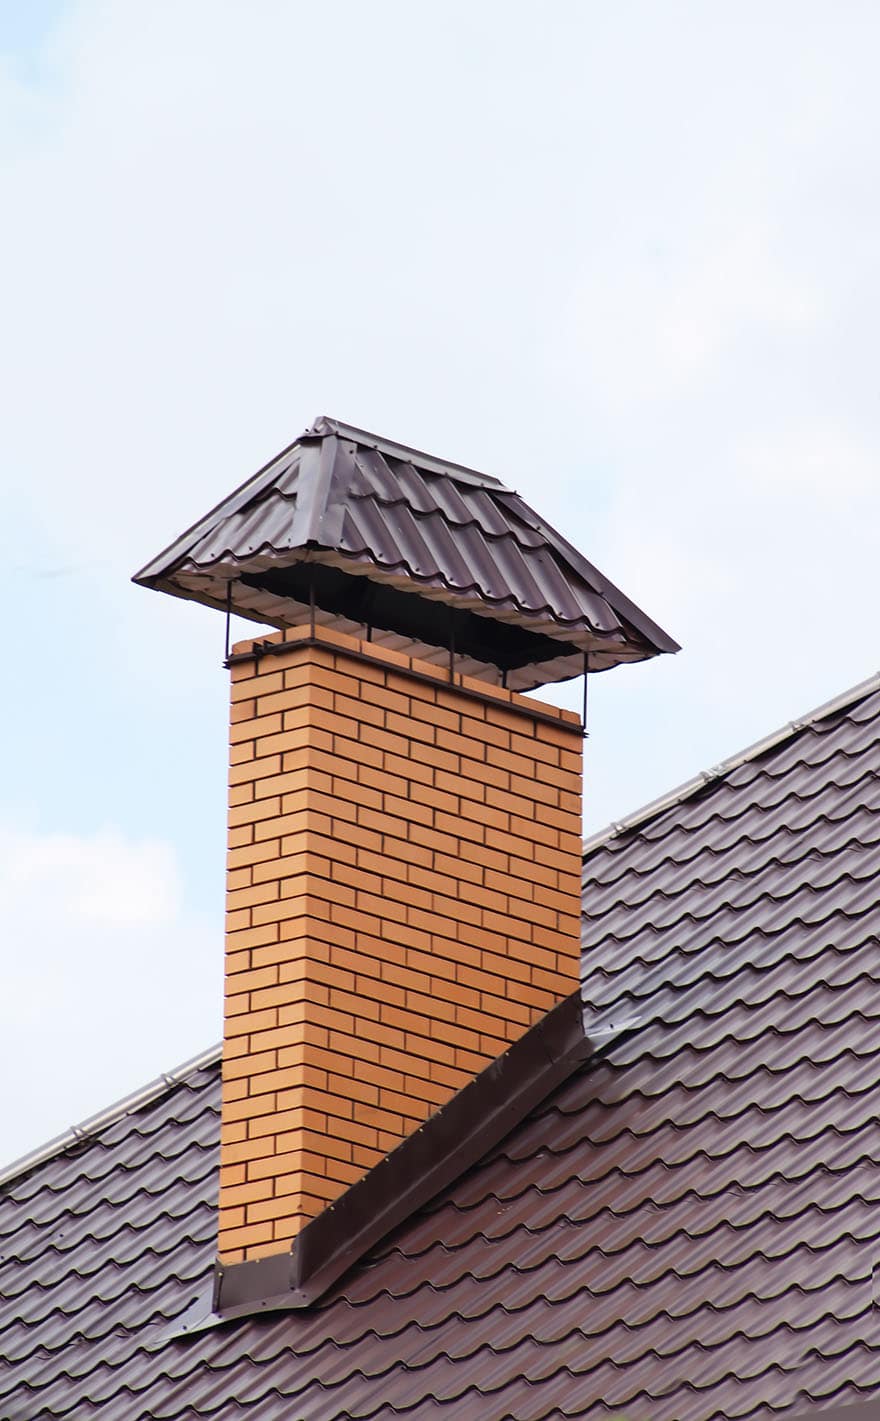 Choosing a good chimney cleaning service